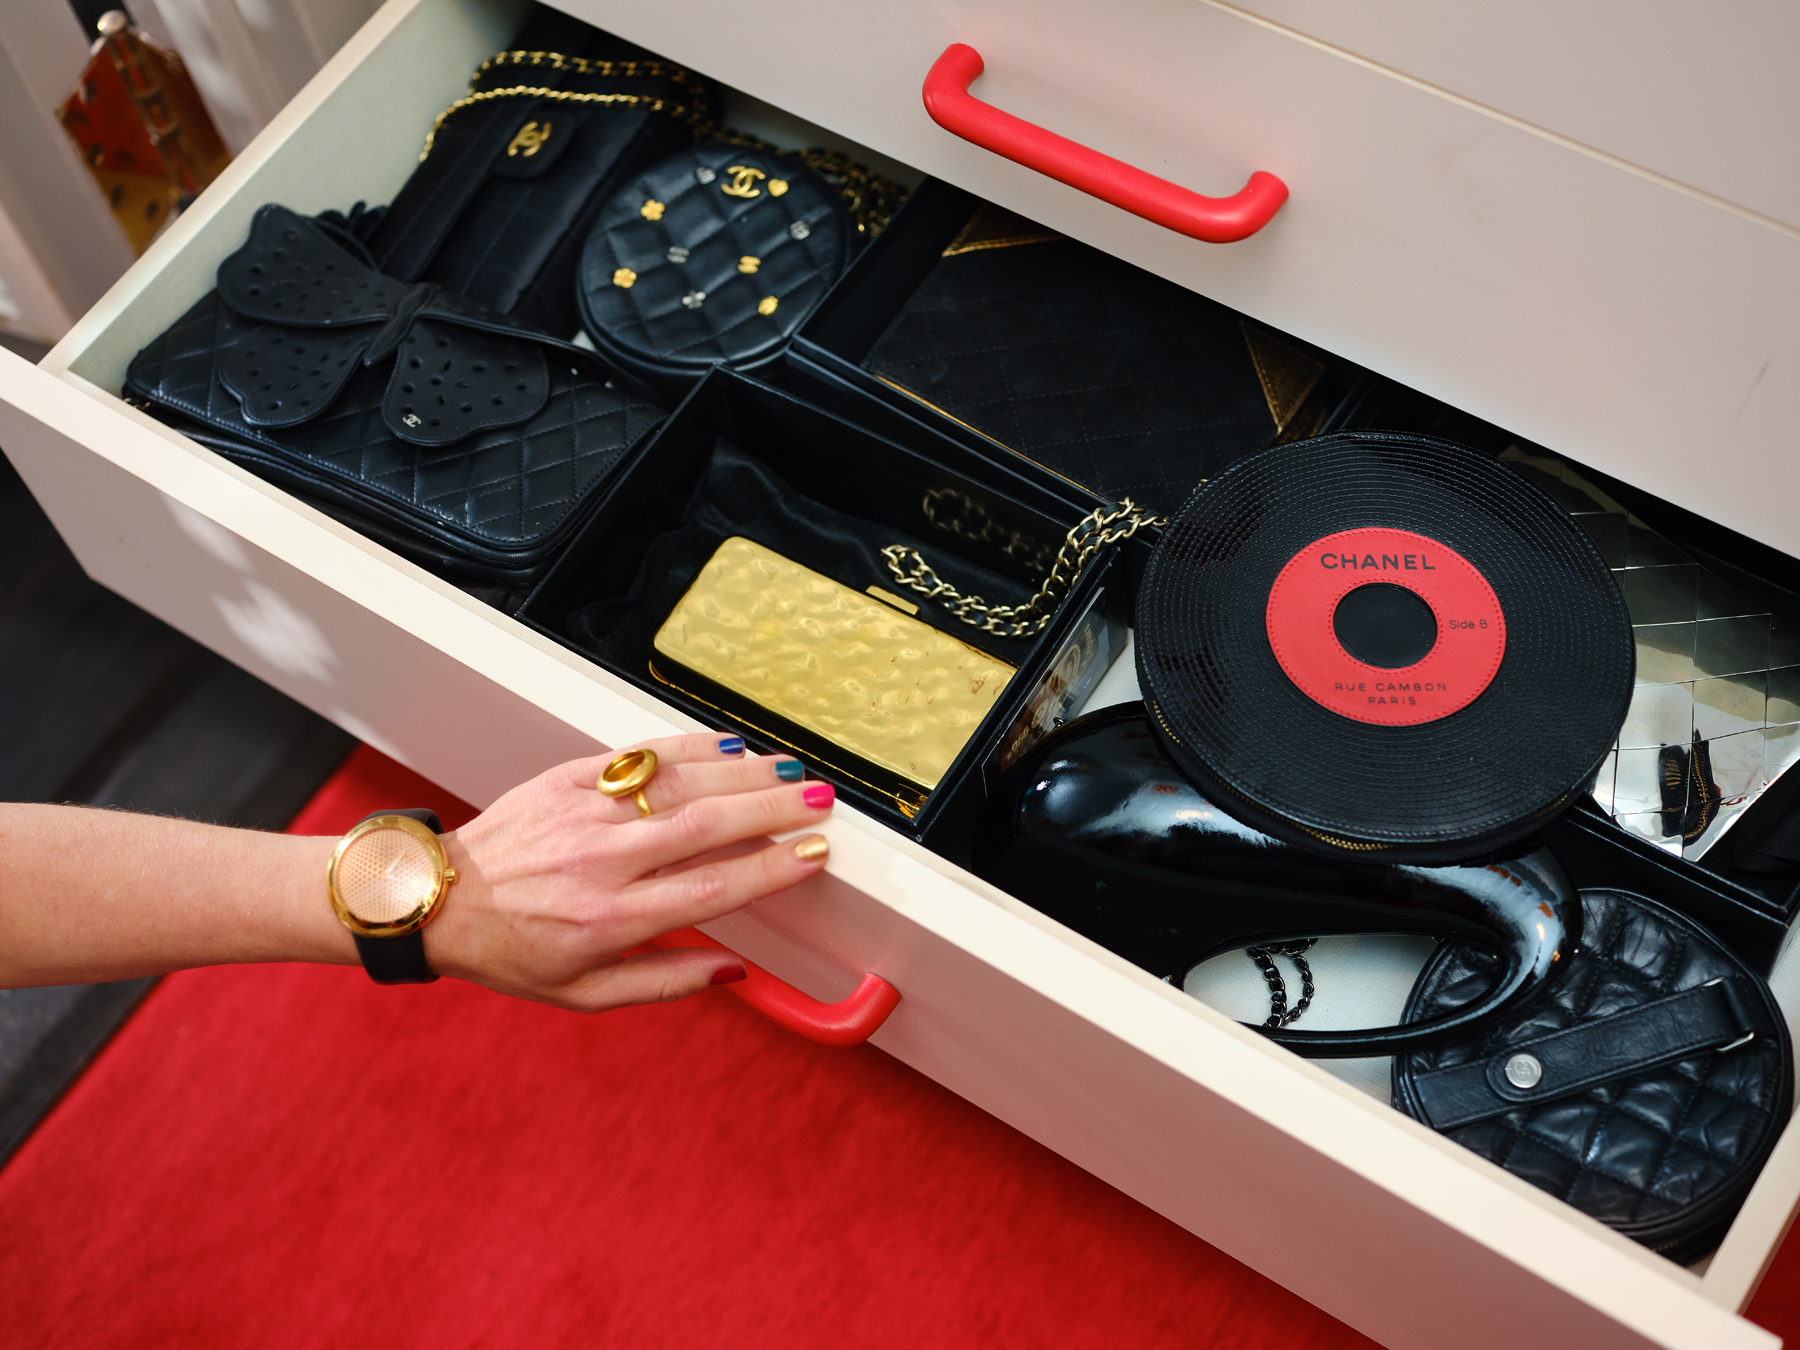 Chanel collector Sharon Coplan Hurwitz opens a drawer in her walk-in closet to reveal a few of her prized Chanel handbags